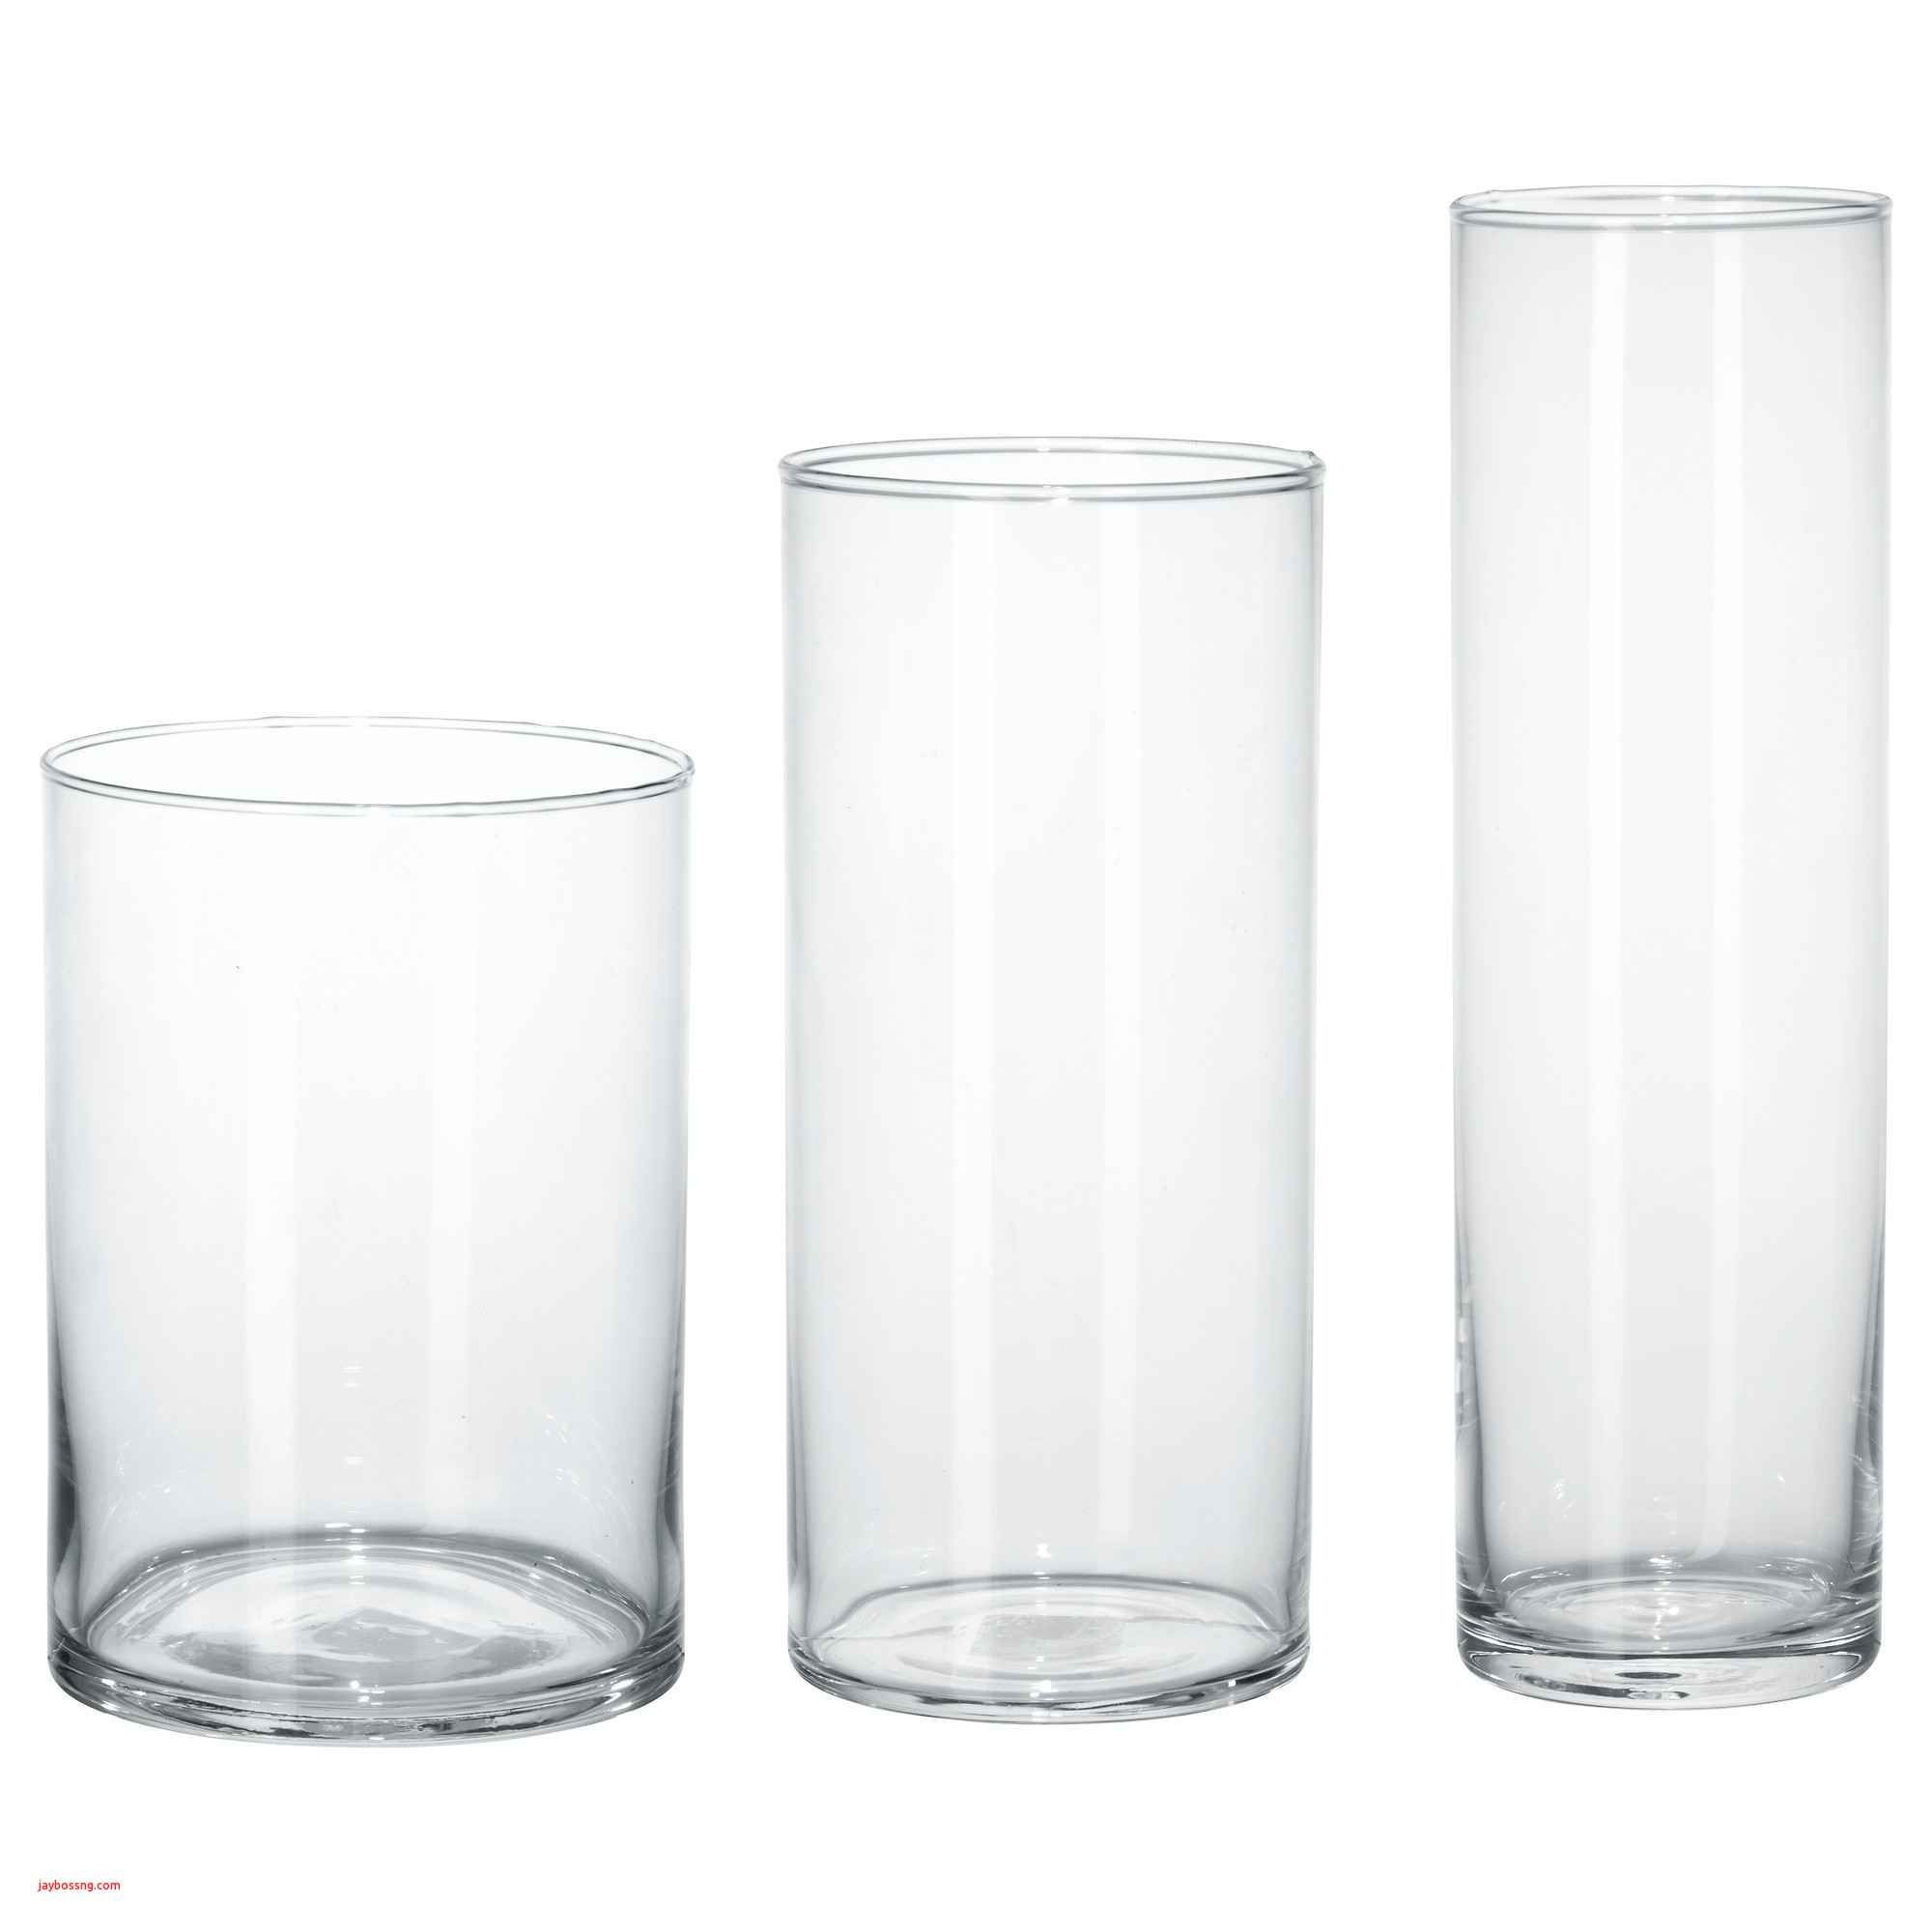 16 Awesome Clear Glass Ginger Jar Vase 2024 free download clear glass ginger jar vase of brown glass vase fresh ikea white table created pe s5h vases ikea inside brown glass vase fresh ikea white table created pe s5h vases ikea vase i 0d bladet